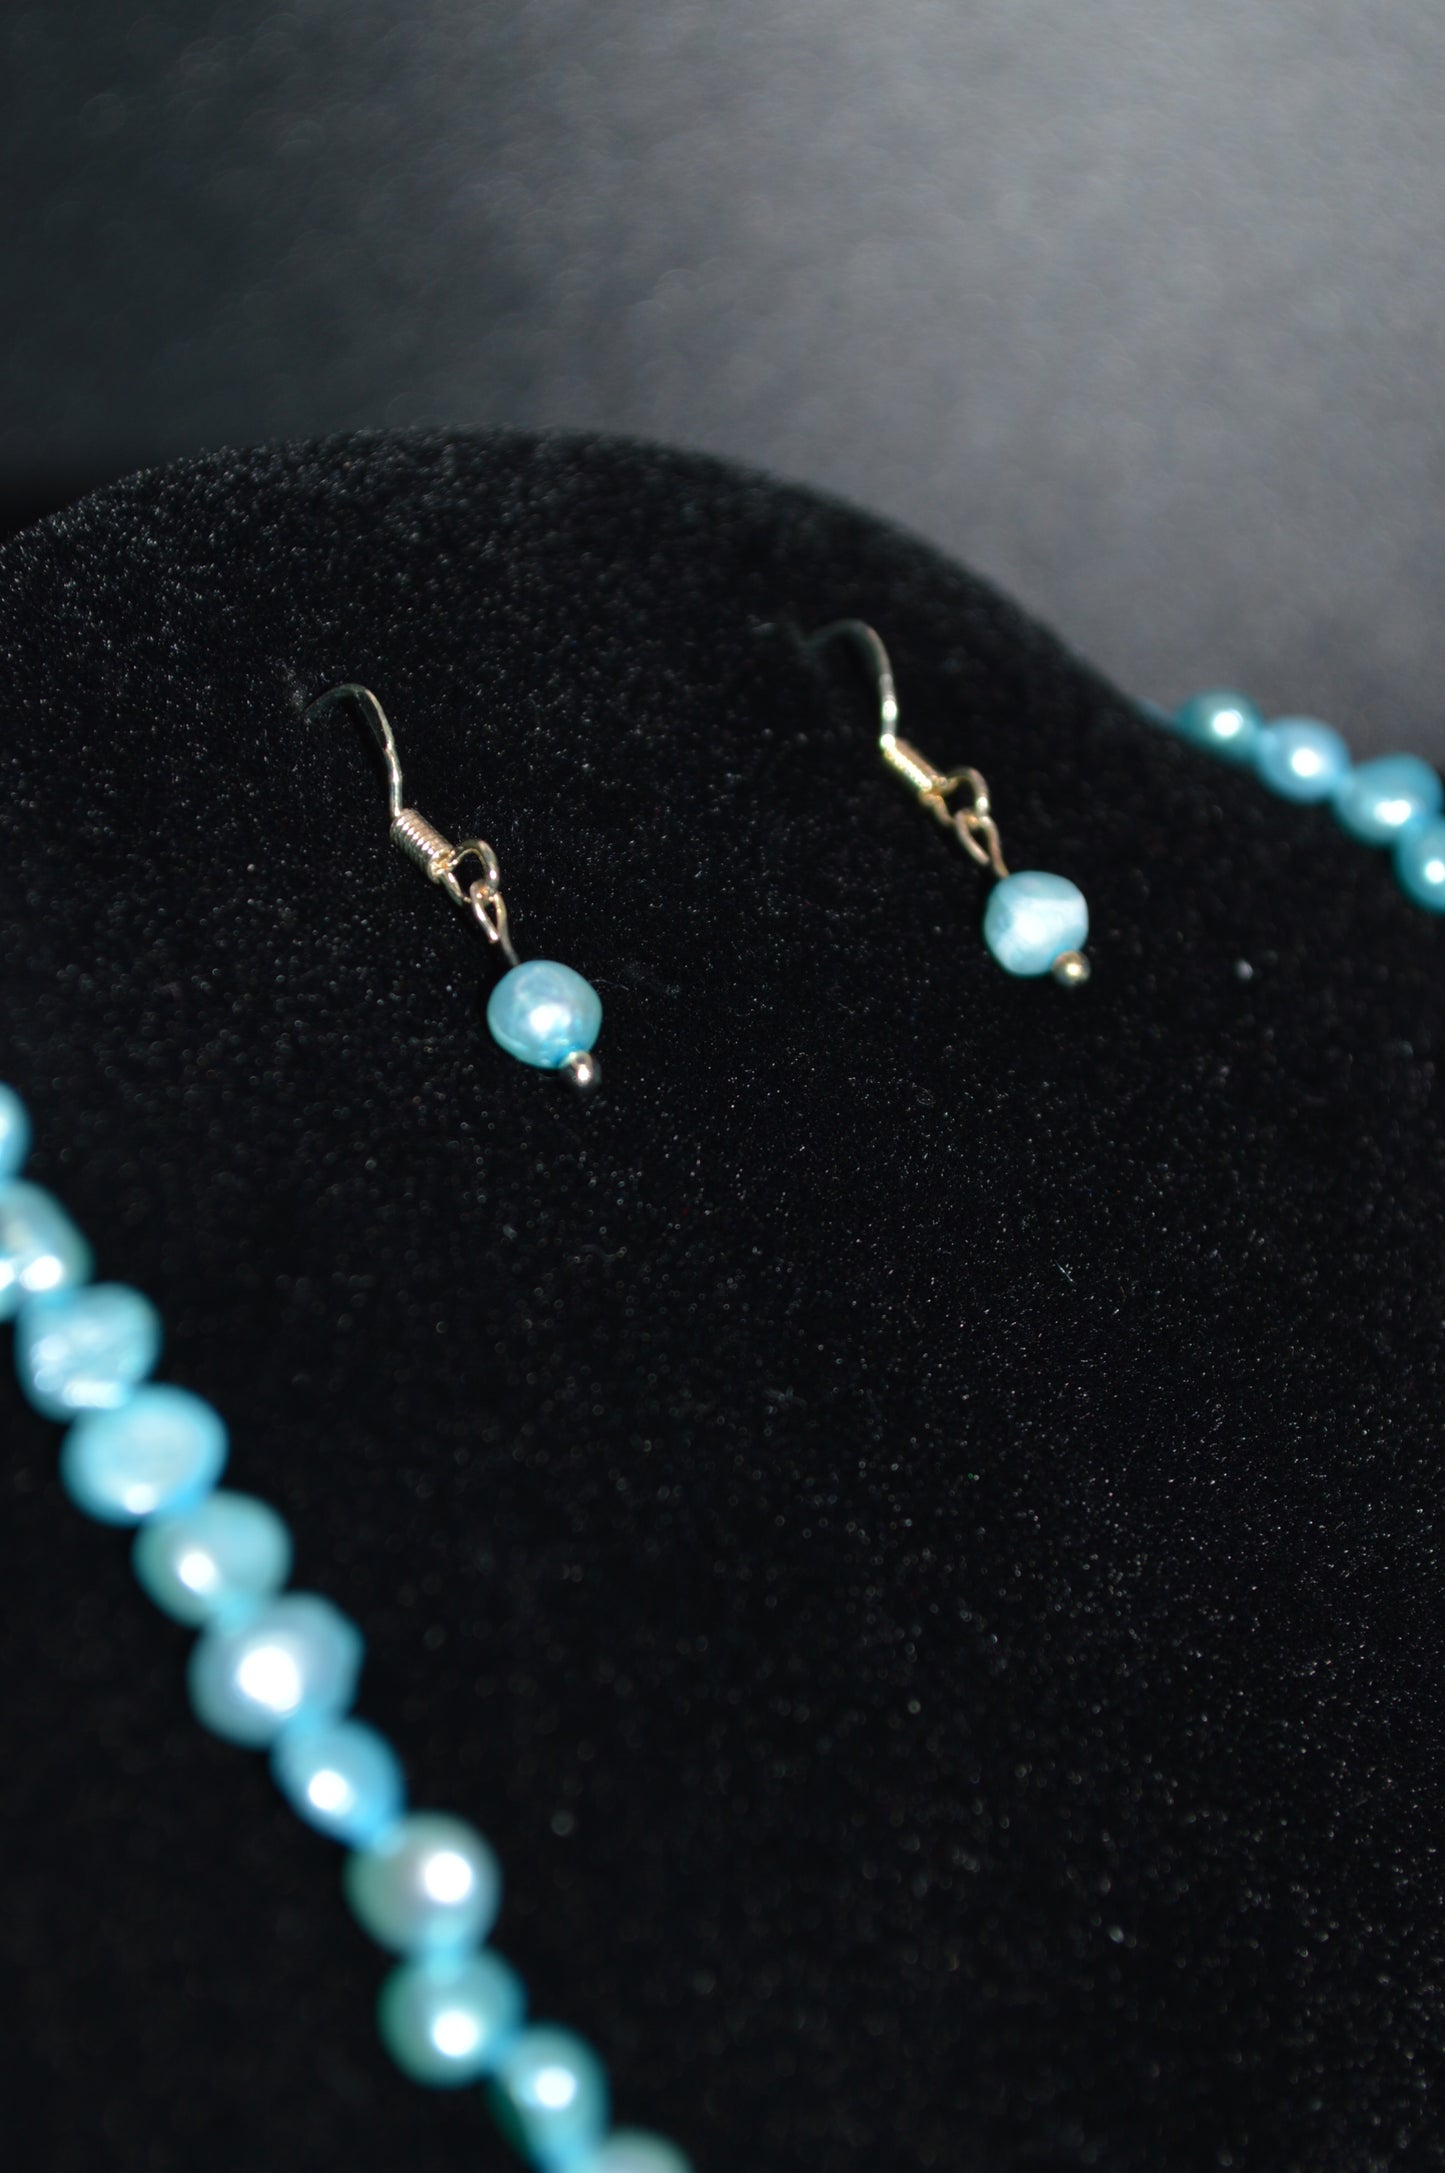 Freshwater Cultured Pearl Necklace and Earring Set (Teal Blue)